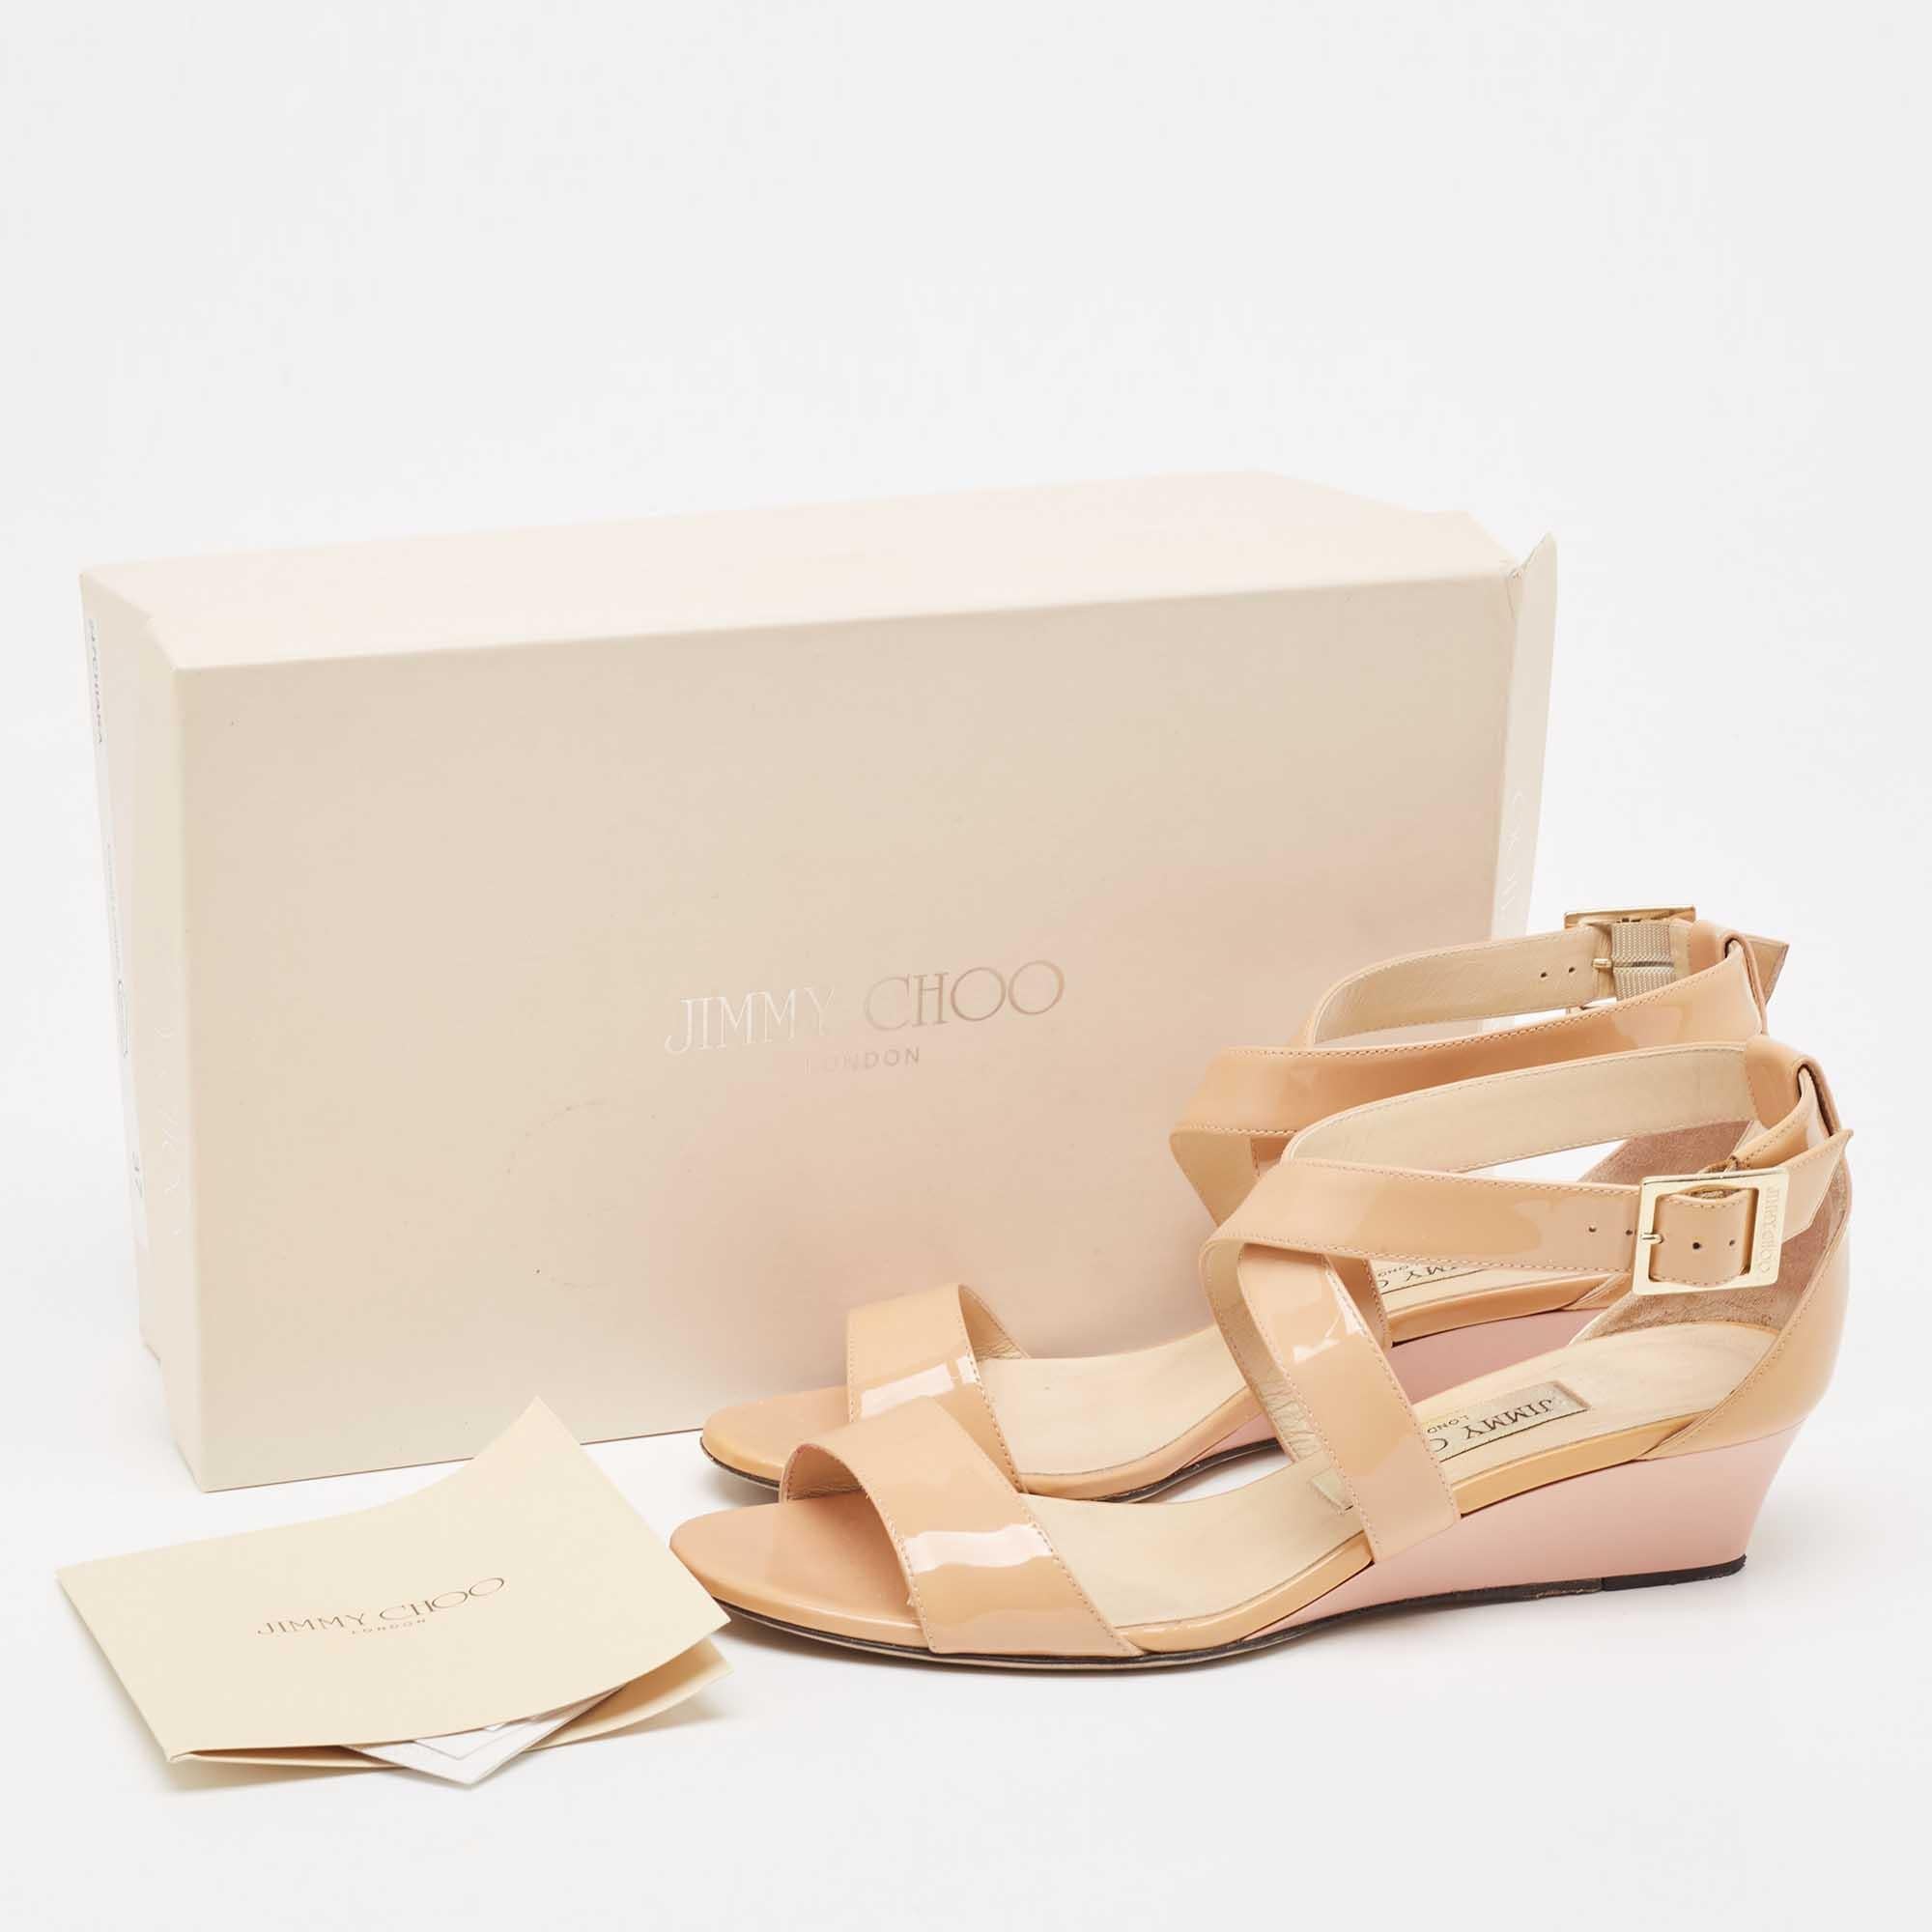 Jimmy Choo Beige Patent Leather Chiara Wedge Sandals Size 37 For Sale 6